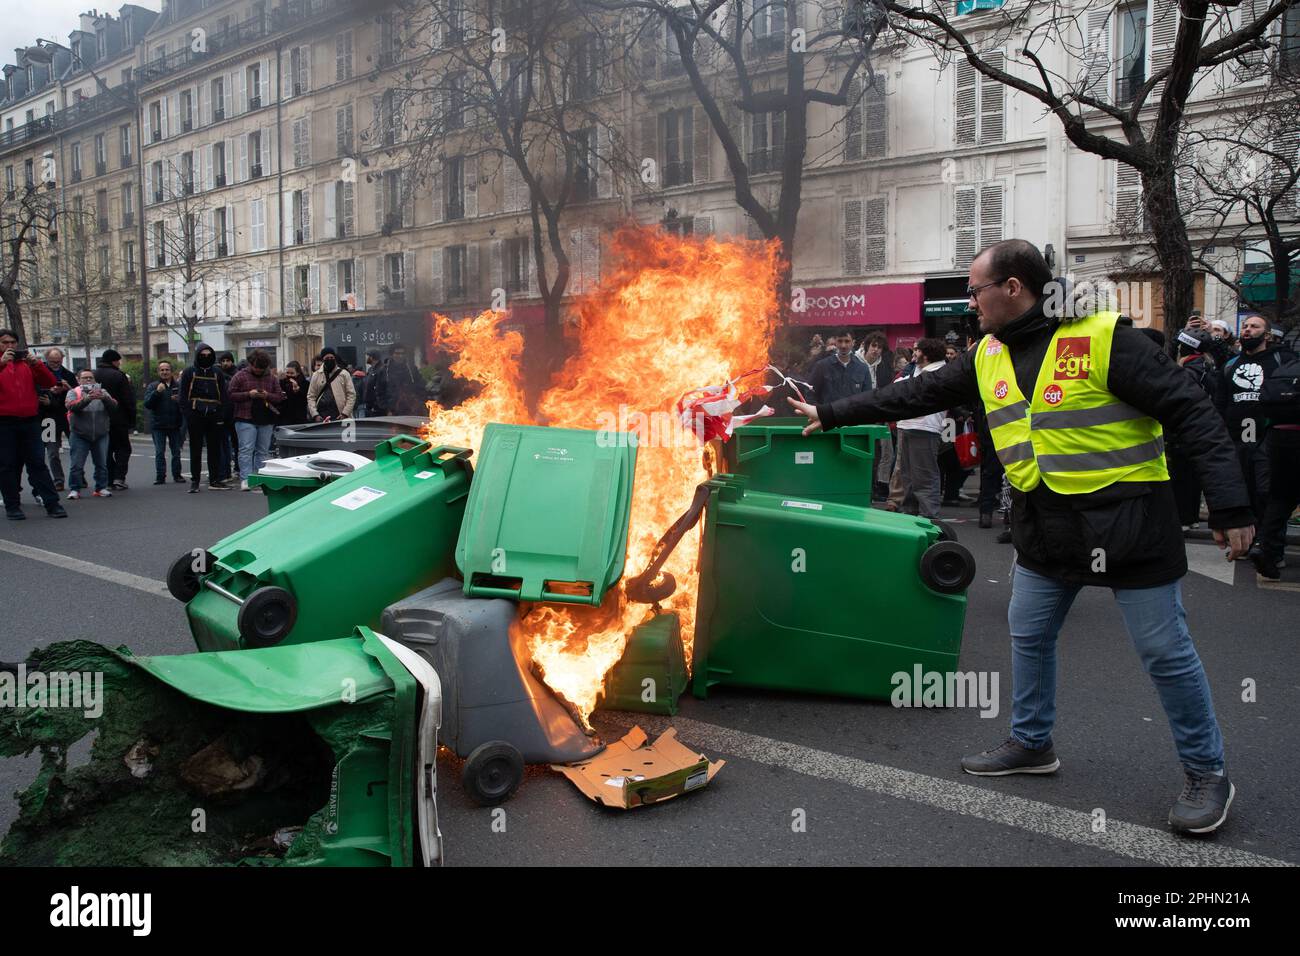 PARIS, France. 28th Mar, 2023. A protester throws rubbish onto a fire at a demonstration in Paris over pension reform. President Macron wants to introduce a bill which will raise the retirement age from 62 to 64. Credit: Lucy North/Alamy Live News Stock Photo